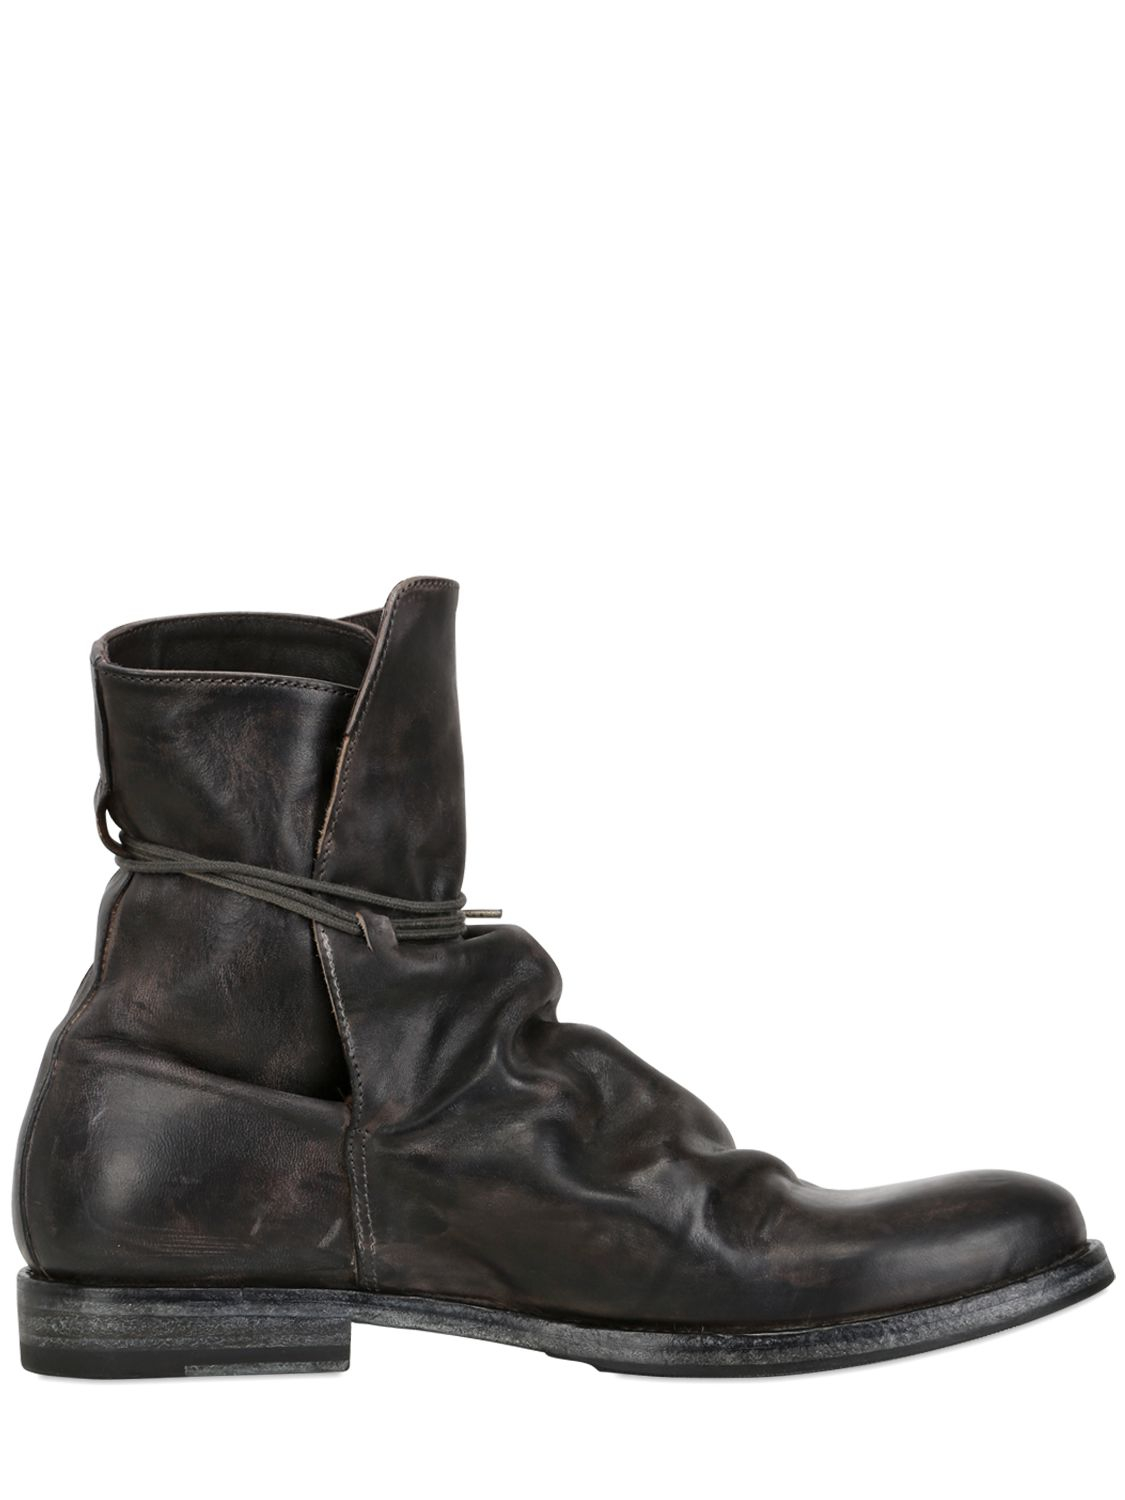 Lyst - Shoto Vintage Horse Leather Boots in Gray for Men